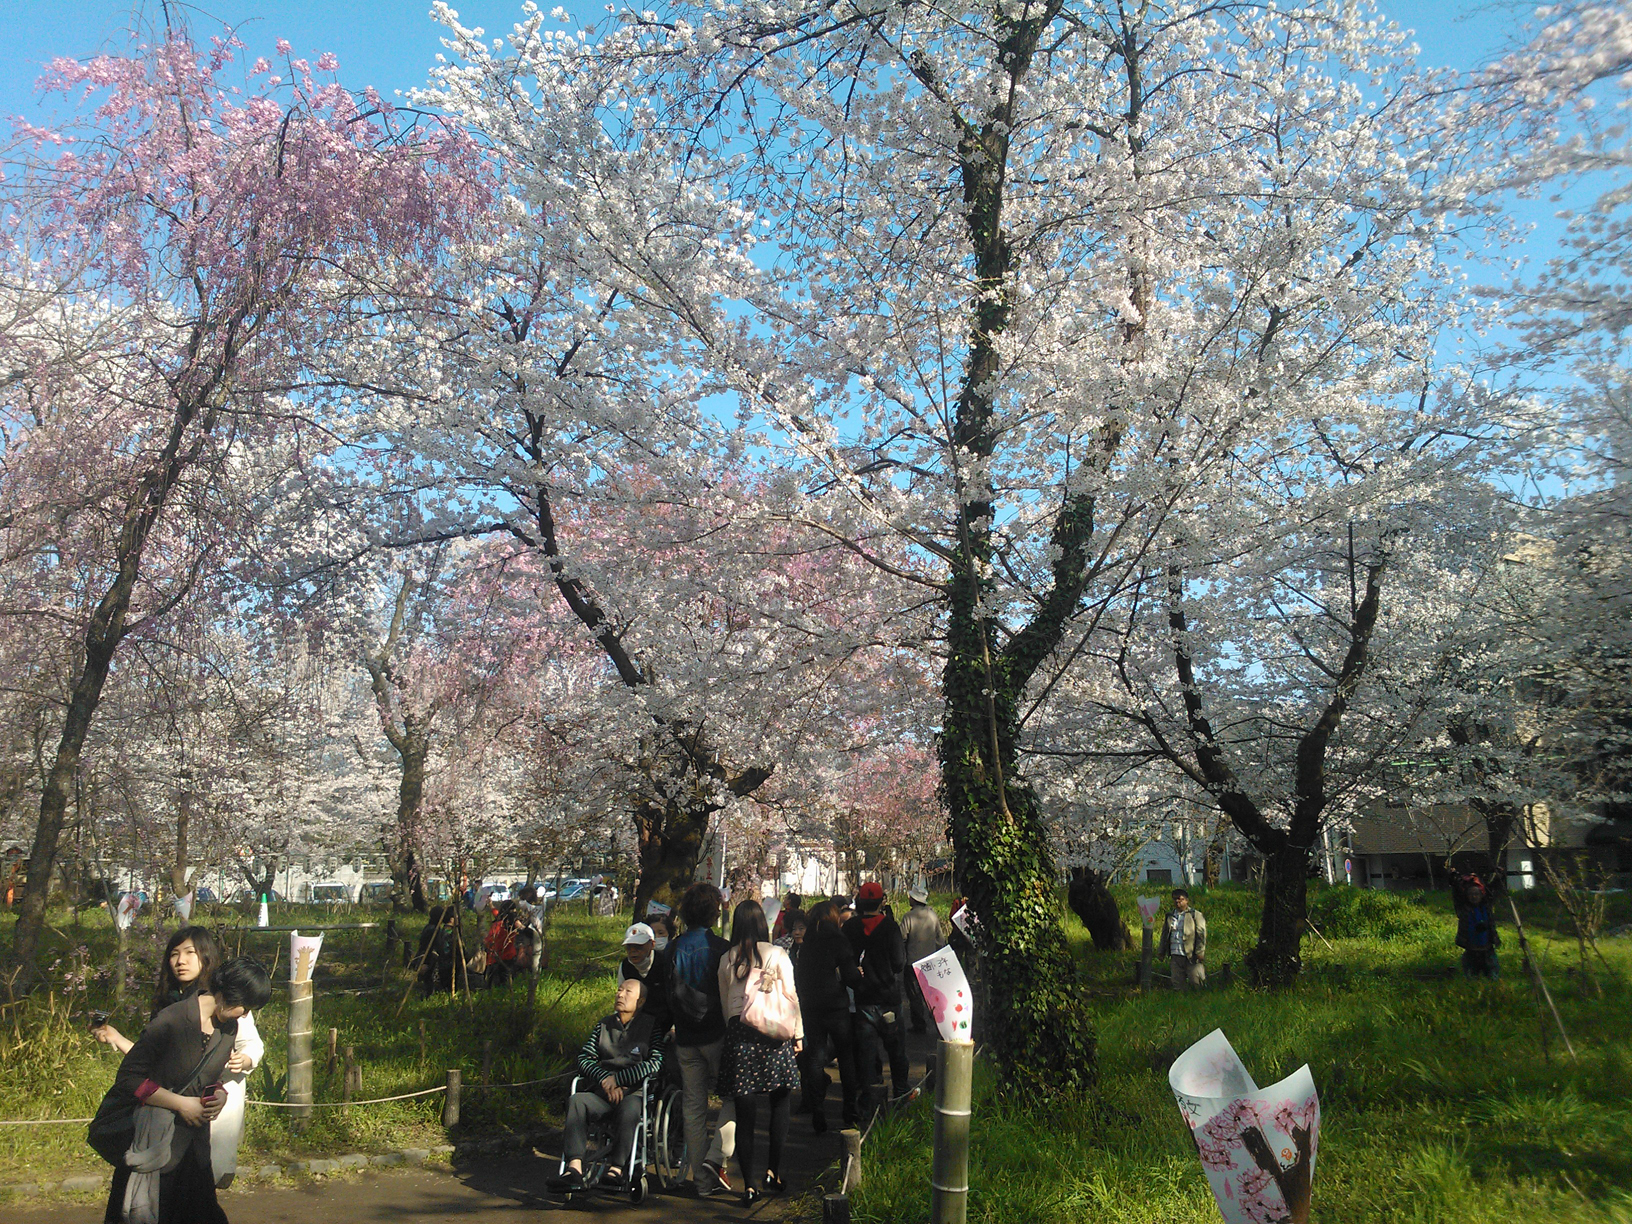 Visitors admiring the cherry trees.